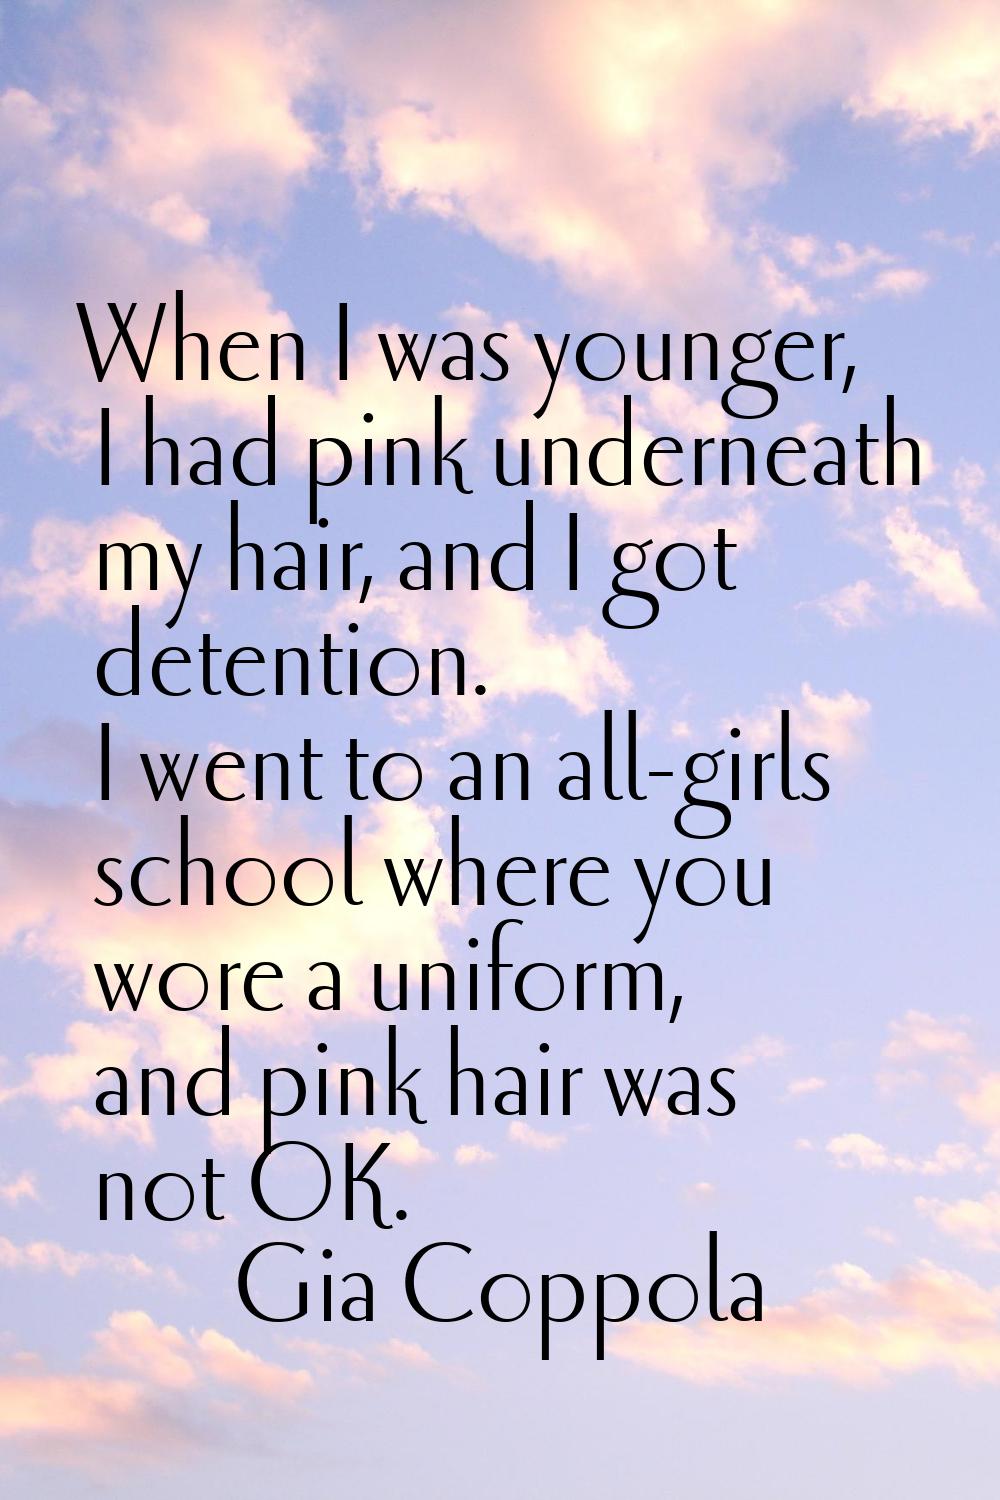 When I was younger, I had pink underneath my hair, and I got detention. I went to an all-girls scho